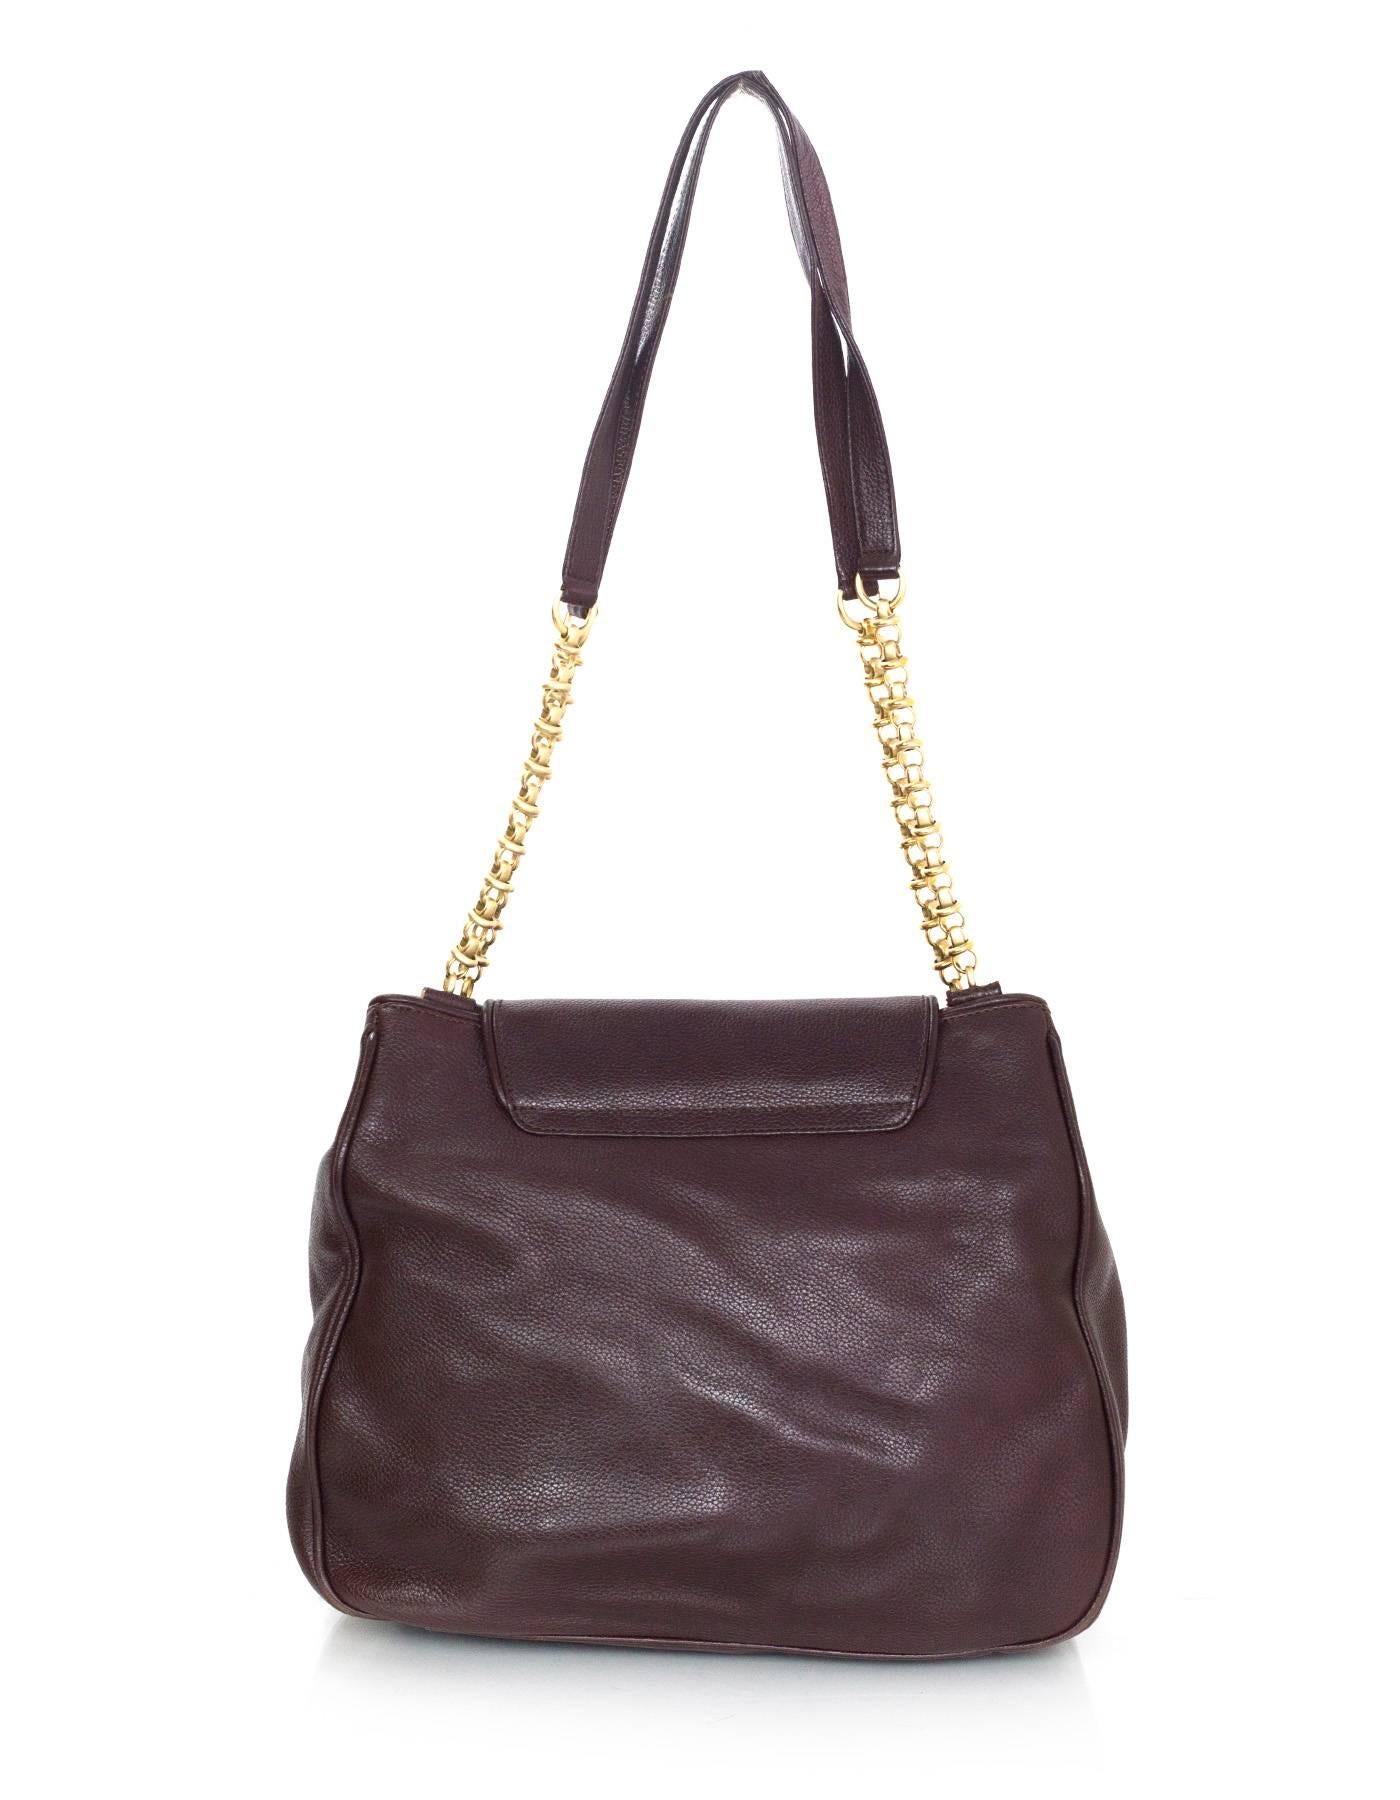 Barry Kieselstein-Cord Brown Leather Shoulder Bag 
Features matte pale goldtone frog and ladybug detail at closure

Made In: Italy
Year of Production: 1995
Color: Brown
Hardware: Matte pale goldtone
Materials: Leather
Lining: Green